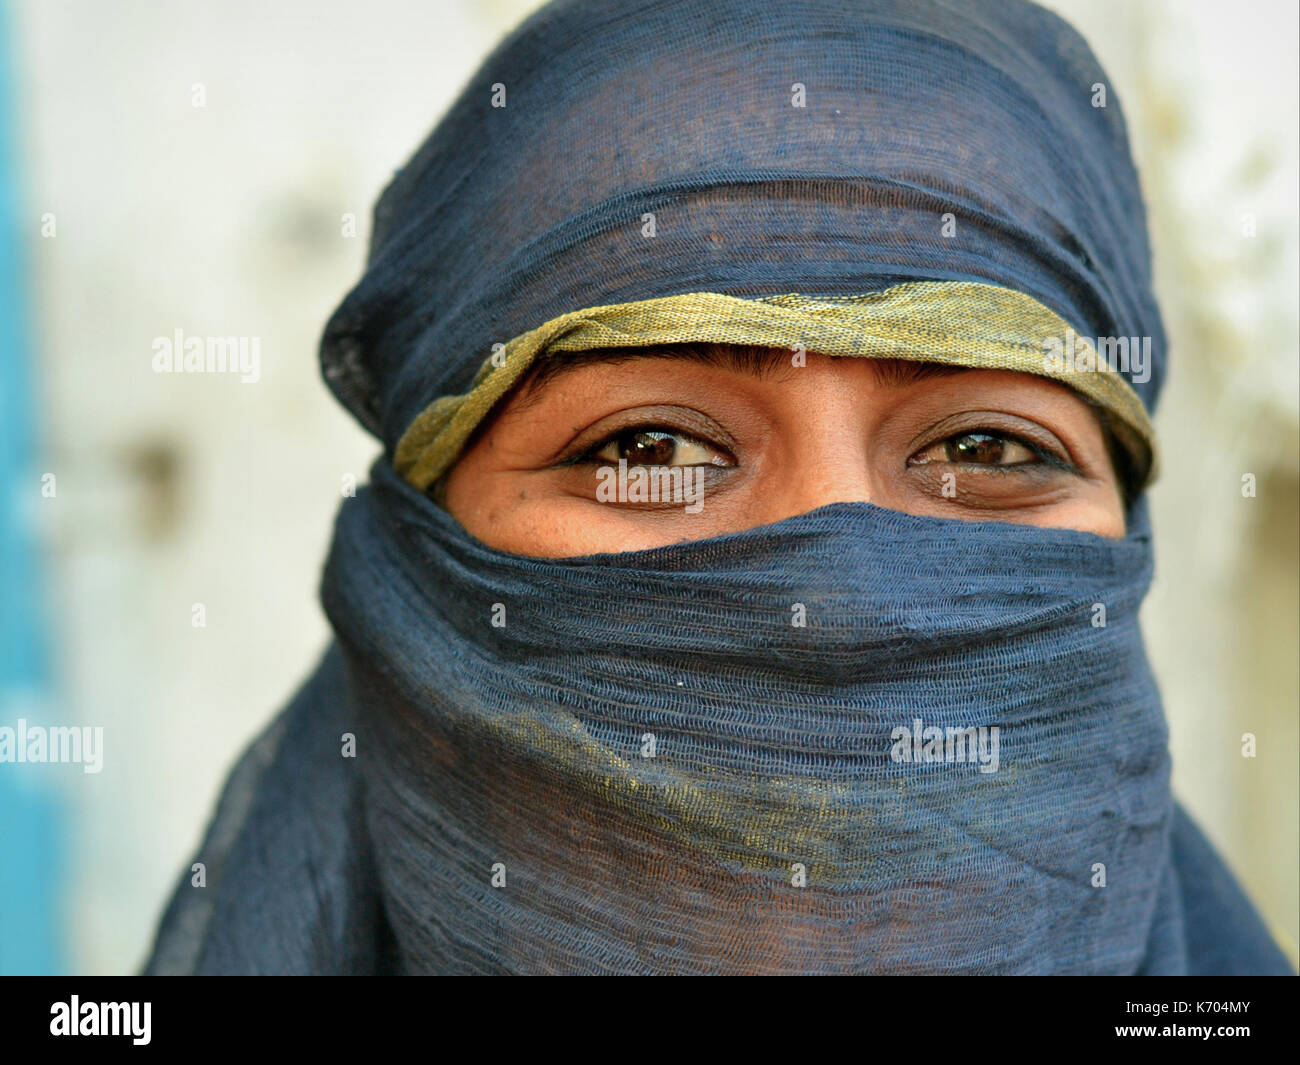 Indian Muslimah with smiling eyes wears a semi-sheer black face veil and poses for the camera. Stock Photo